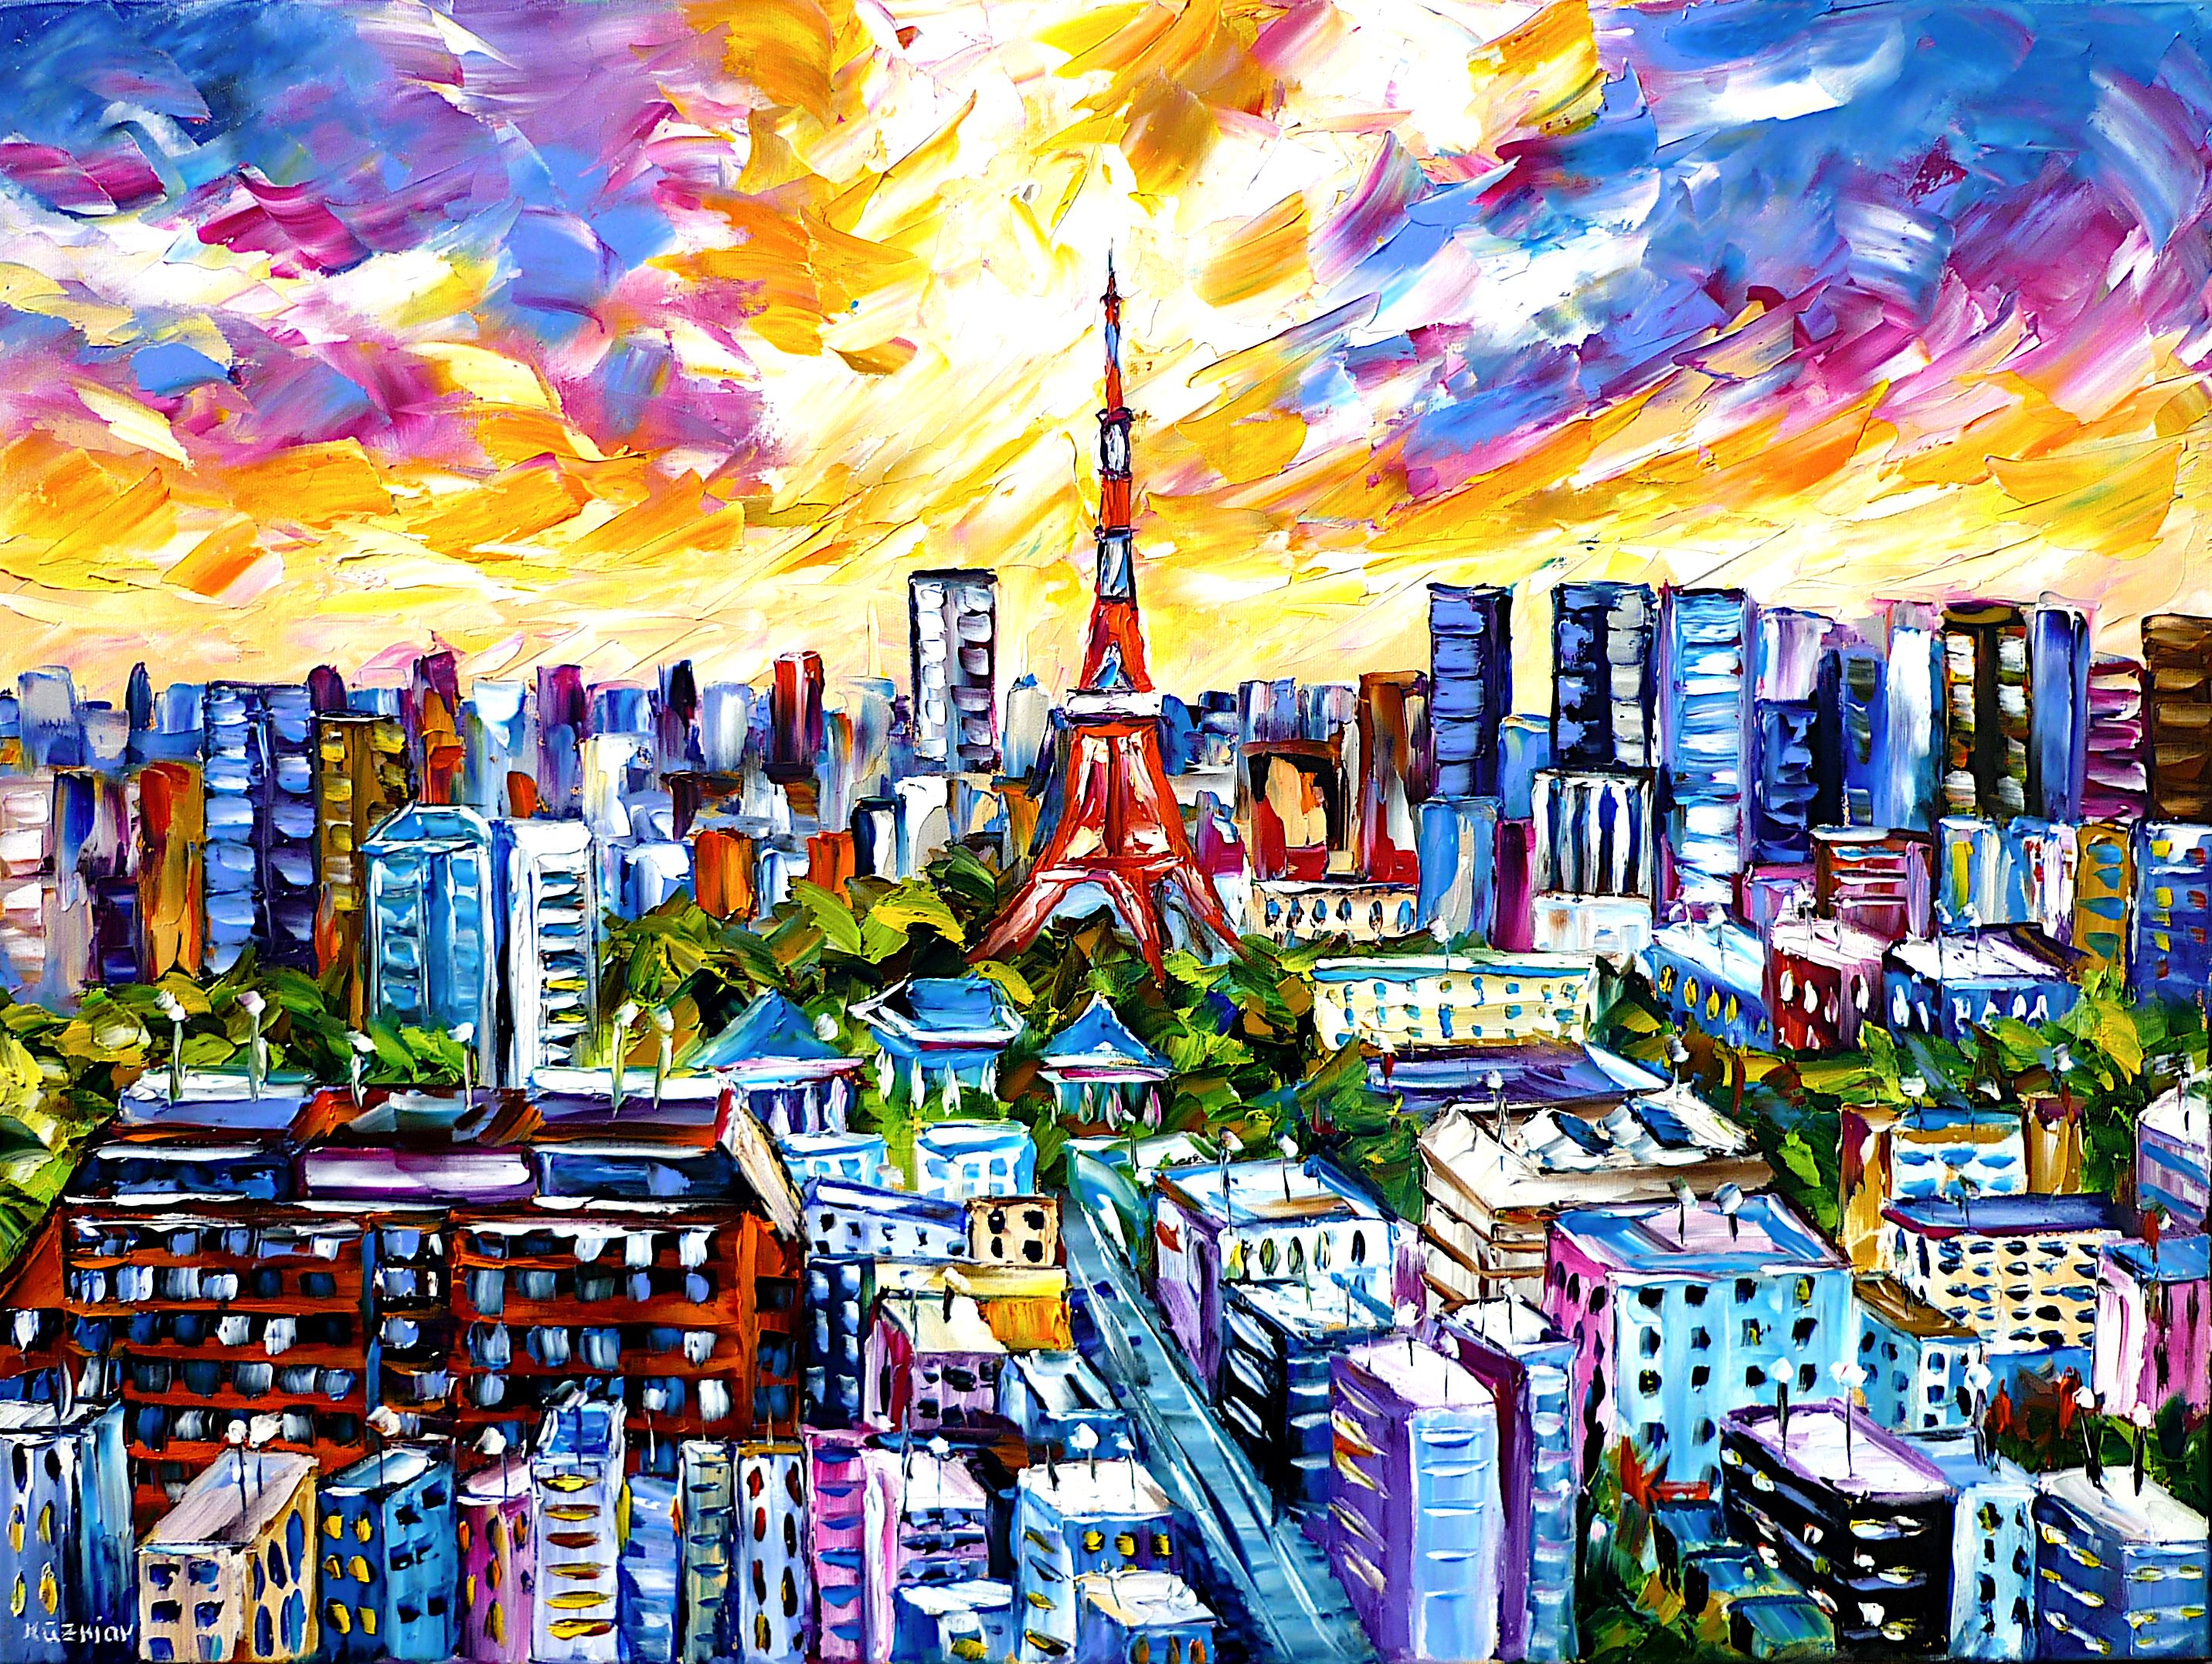 tokyo skyline,tokyo from above,tokyo tower,tokyo cityscape,houses of tokyo,tokyo skyscrapers,tokyo colorful,tokyo abstract,tokyo city,abstract sky,tokyo painting,tokyo picture,tokyo tv tower,tokyo love,tokyo lovers,i love tokyo,japan,sky over the city,palette knife oil painting,modern art,modern painting,impressionism,abstract painting,lively colors,colorful painting,bright colors,light reflections,impasto painting,figurative